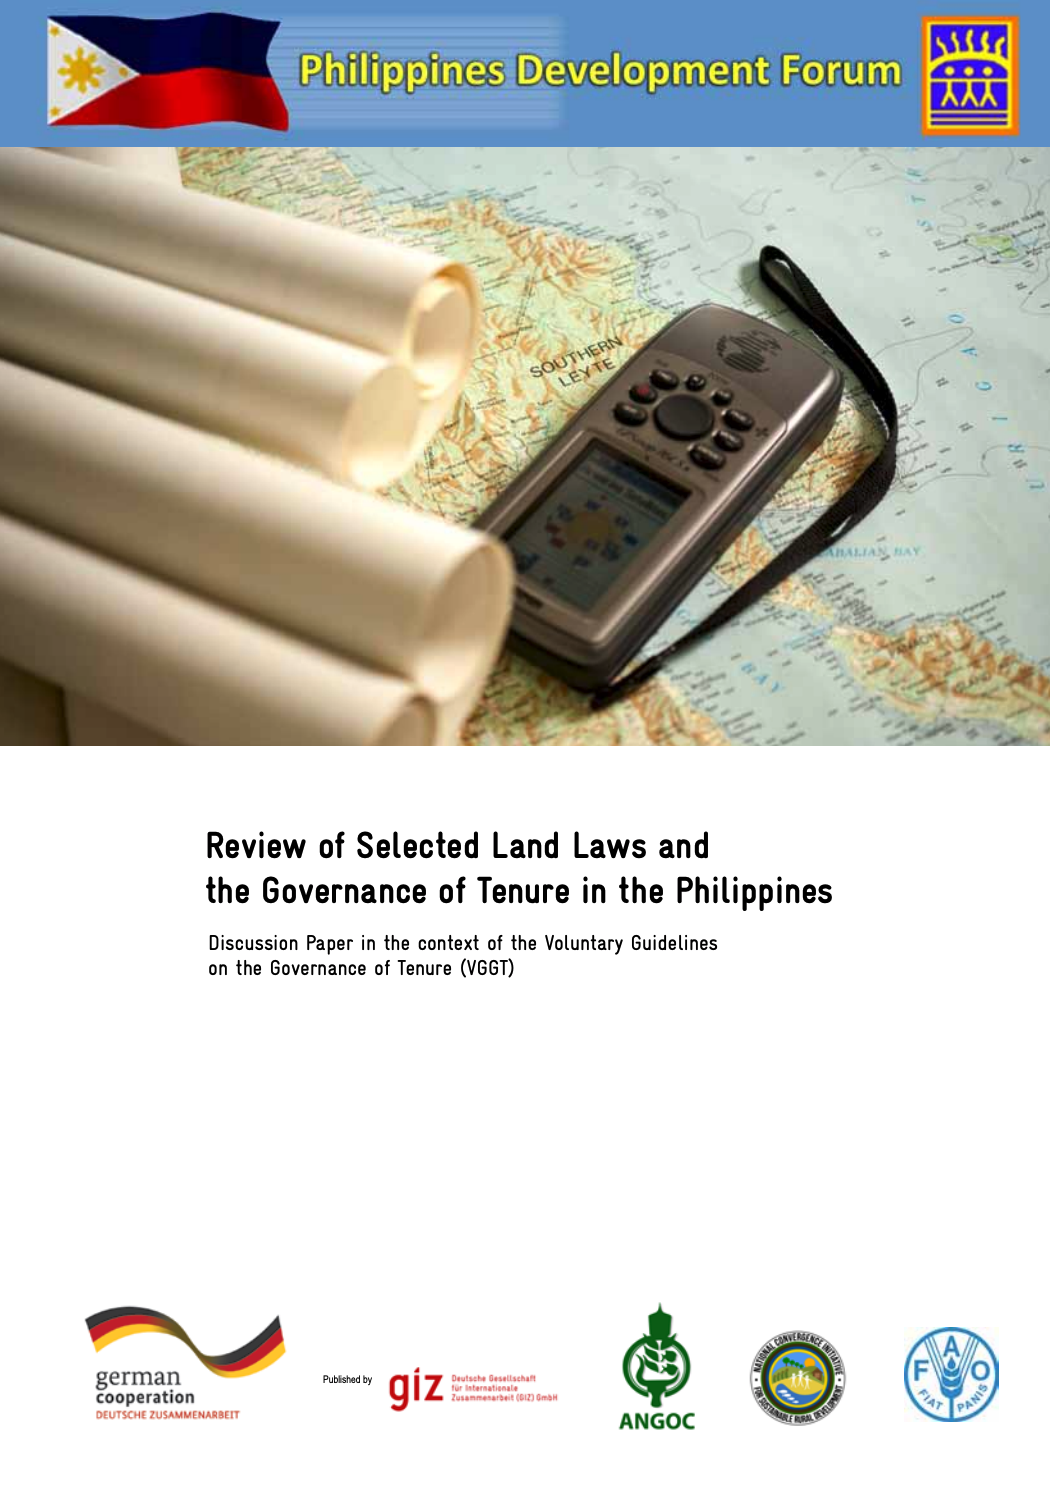 Review of Selected Land Laws and the Governance of Tenure in the Philippines cover image